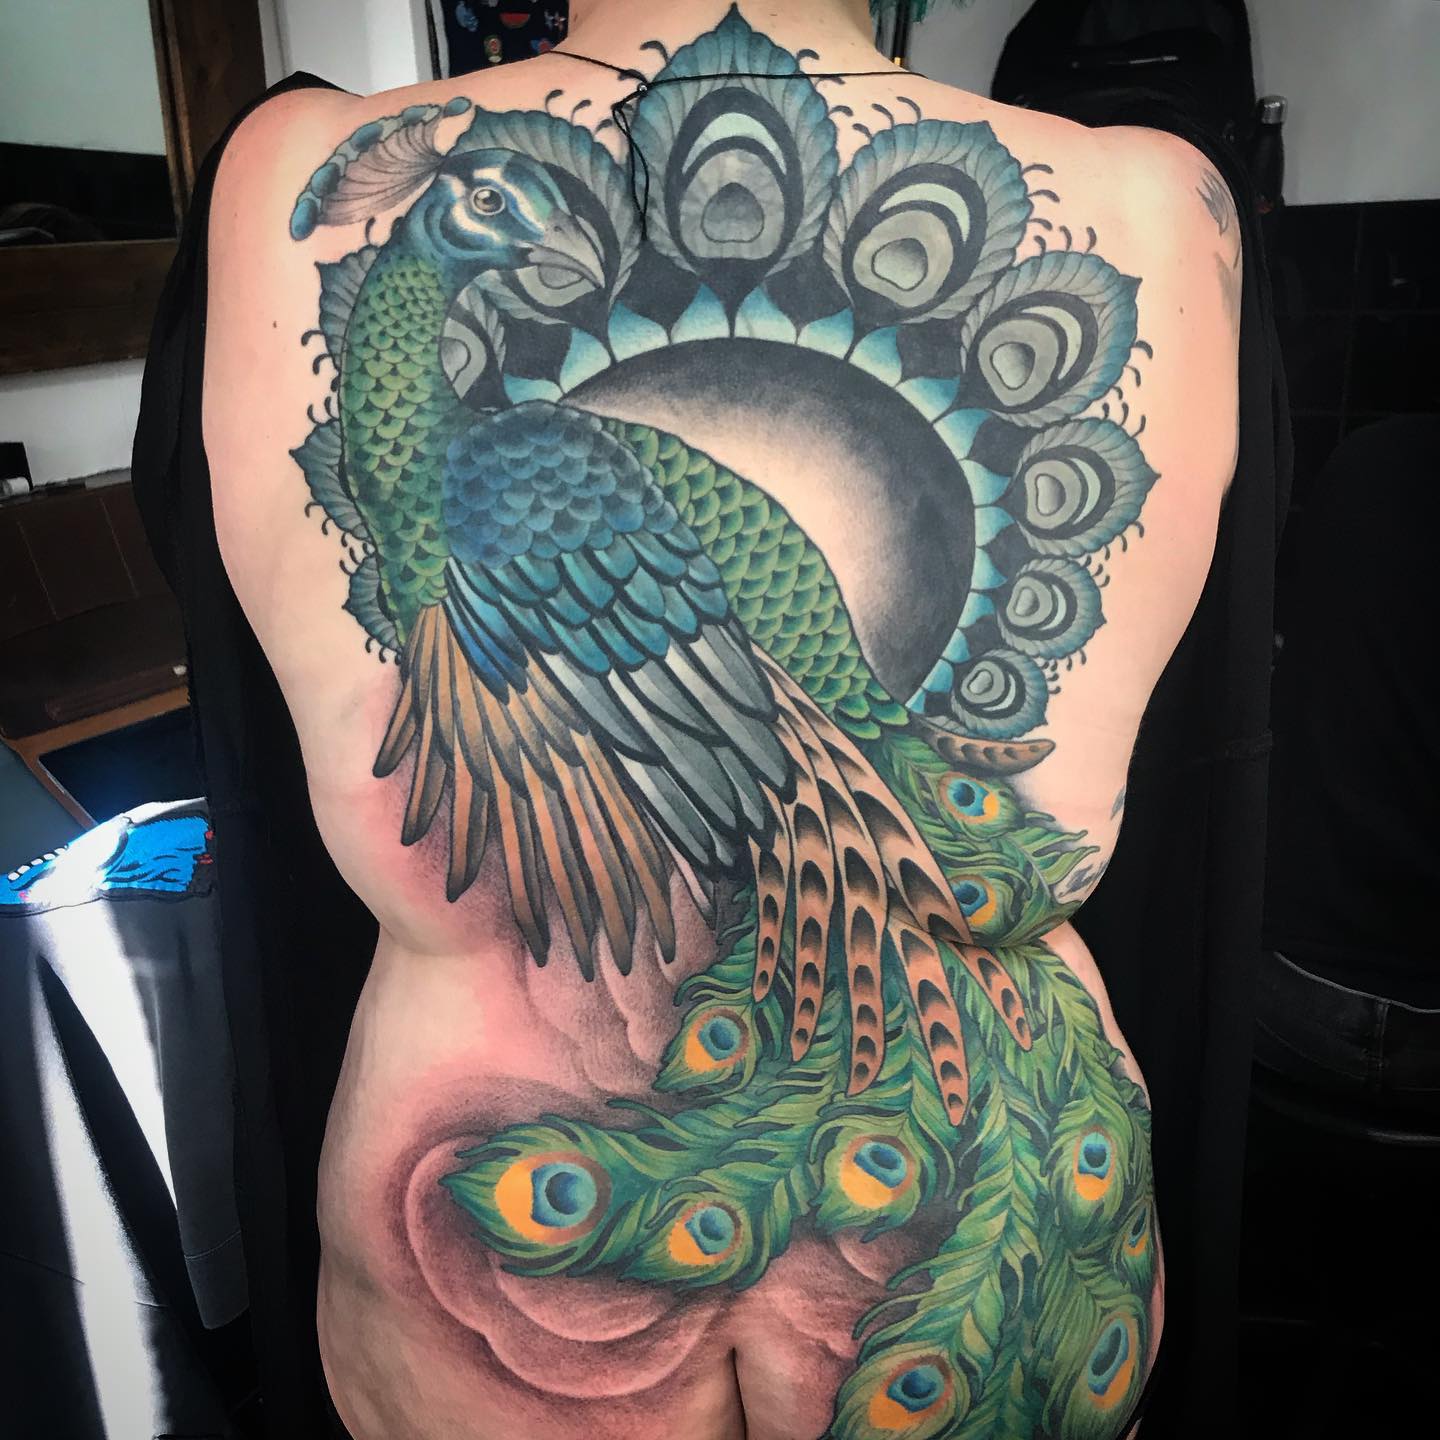 101 Best Peacock Tattoo On Back Ideas That Will Blow Your Mind! - Outsons